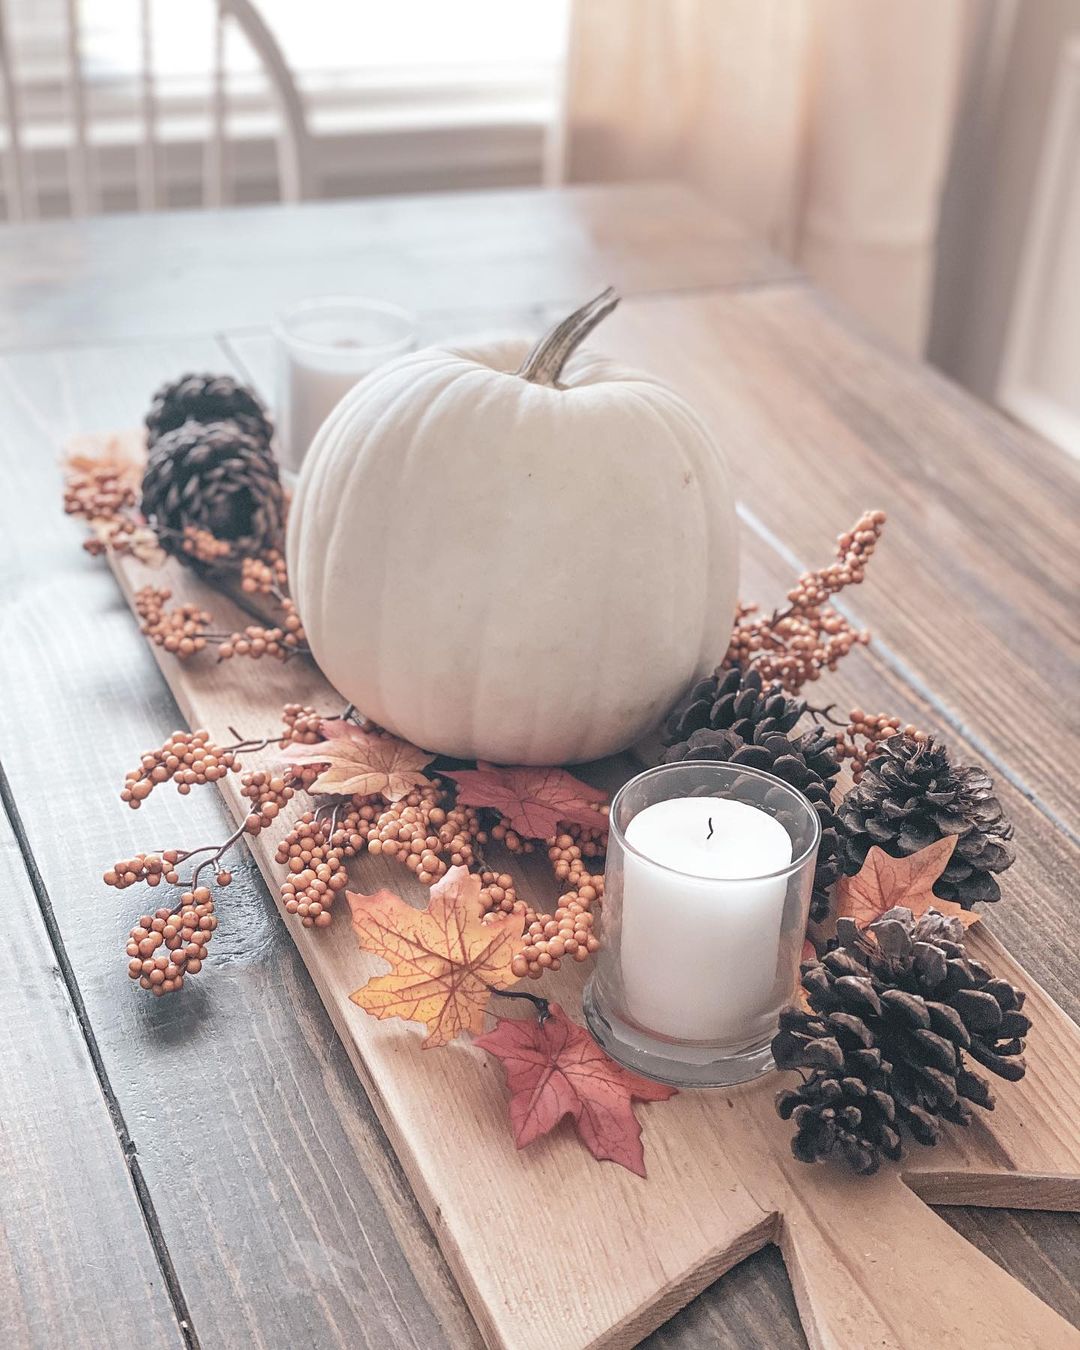 Rustic Romance: Captivating Fall Centerpieces with the Warmth of Candlelight